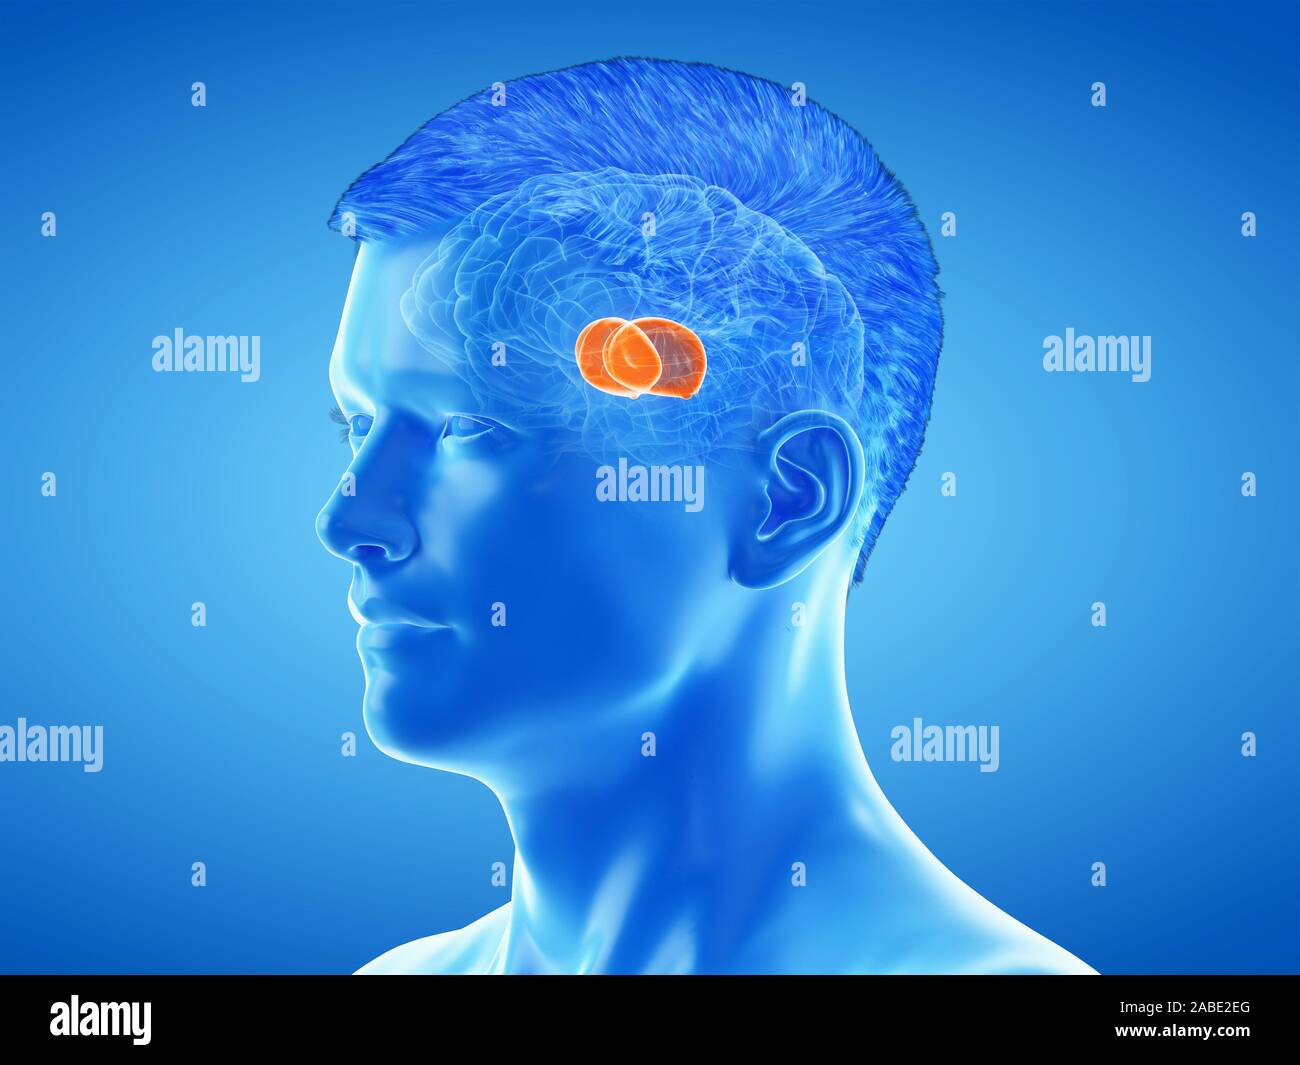 3d rendered medically accurate illustration of the brain anatomy - the thalamus Stock Photo